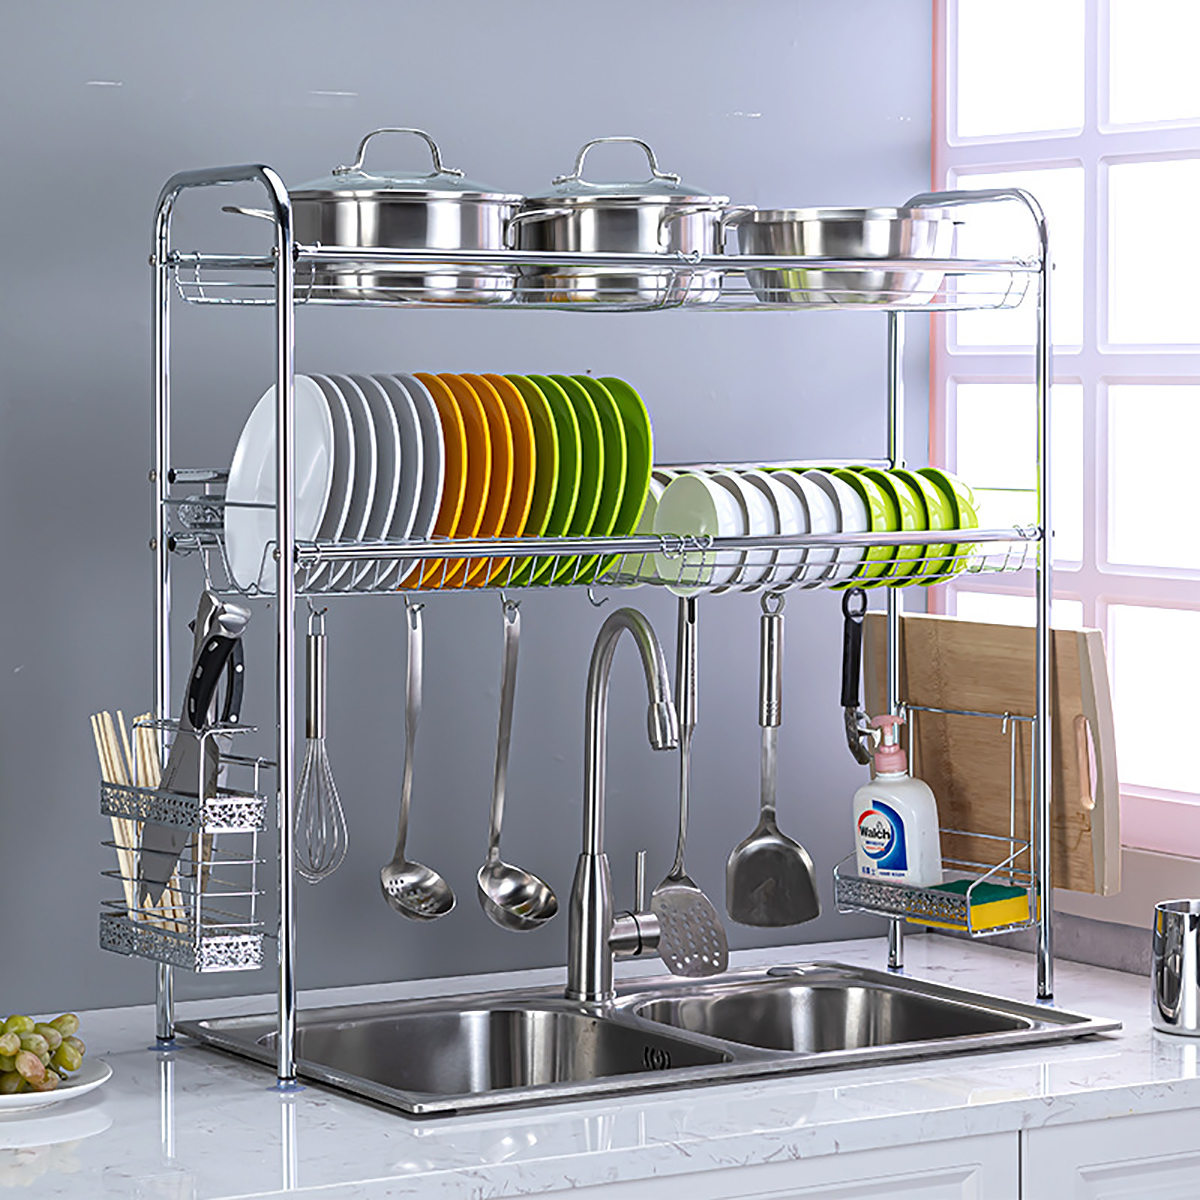 Parts & Accessories 2Tier Stainless Steel Over Sink Dish Drying Rack Holder was listed for R1